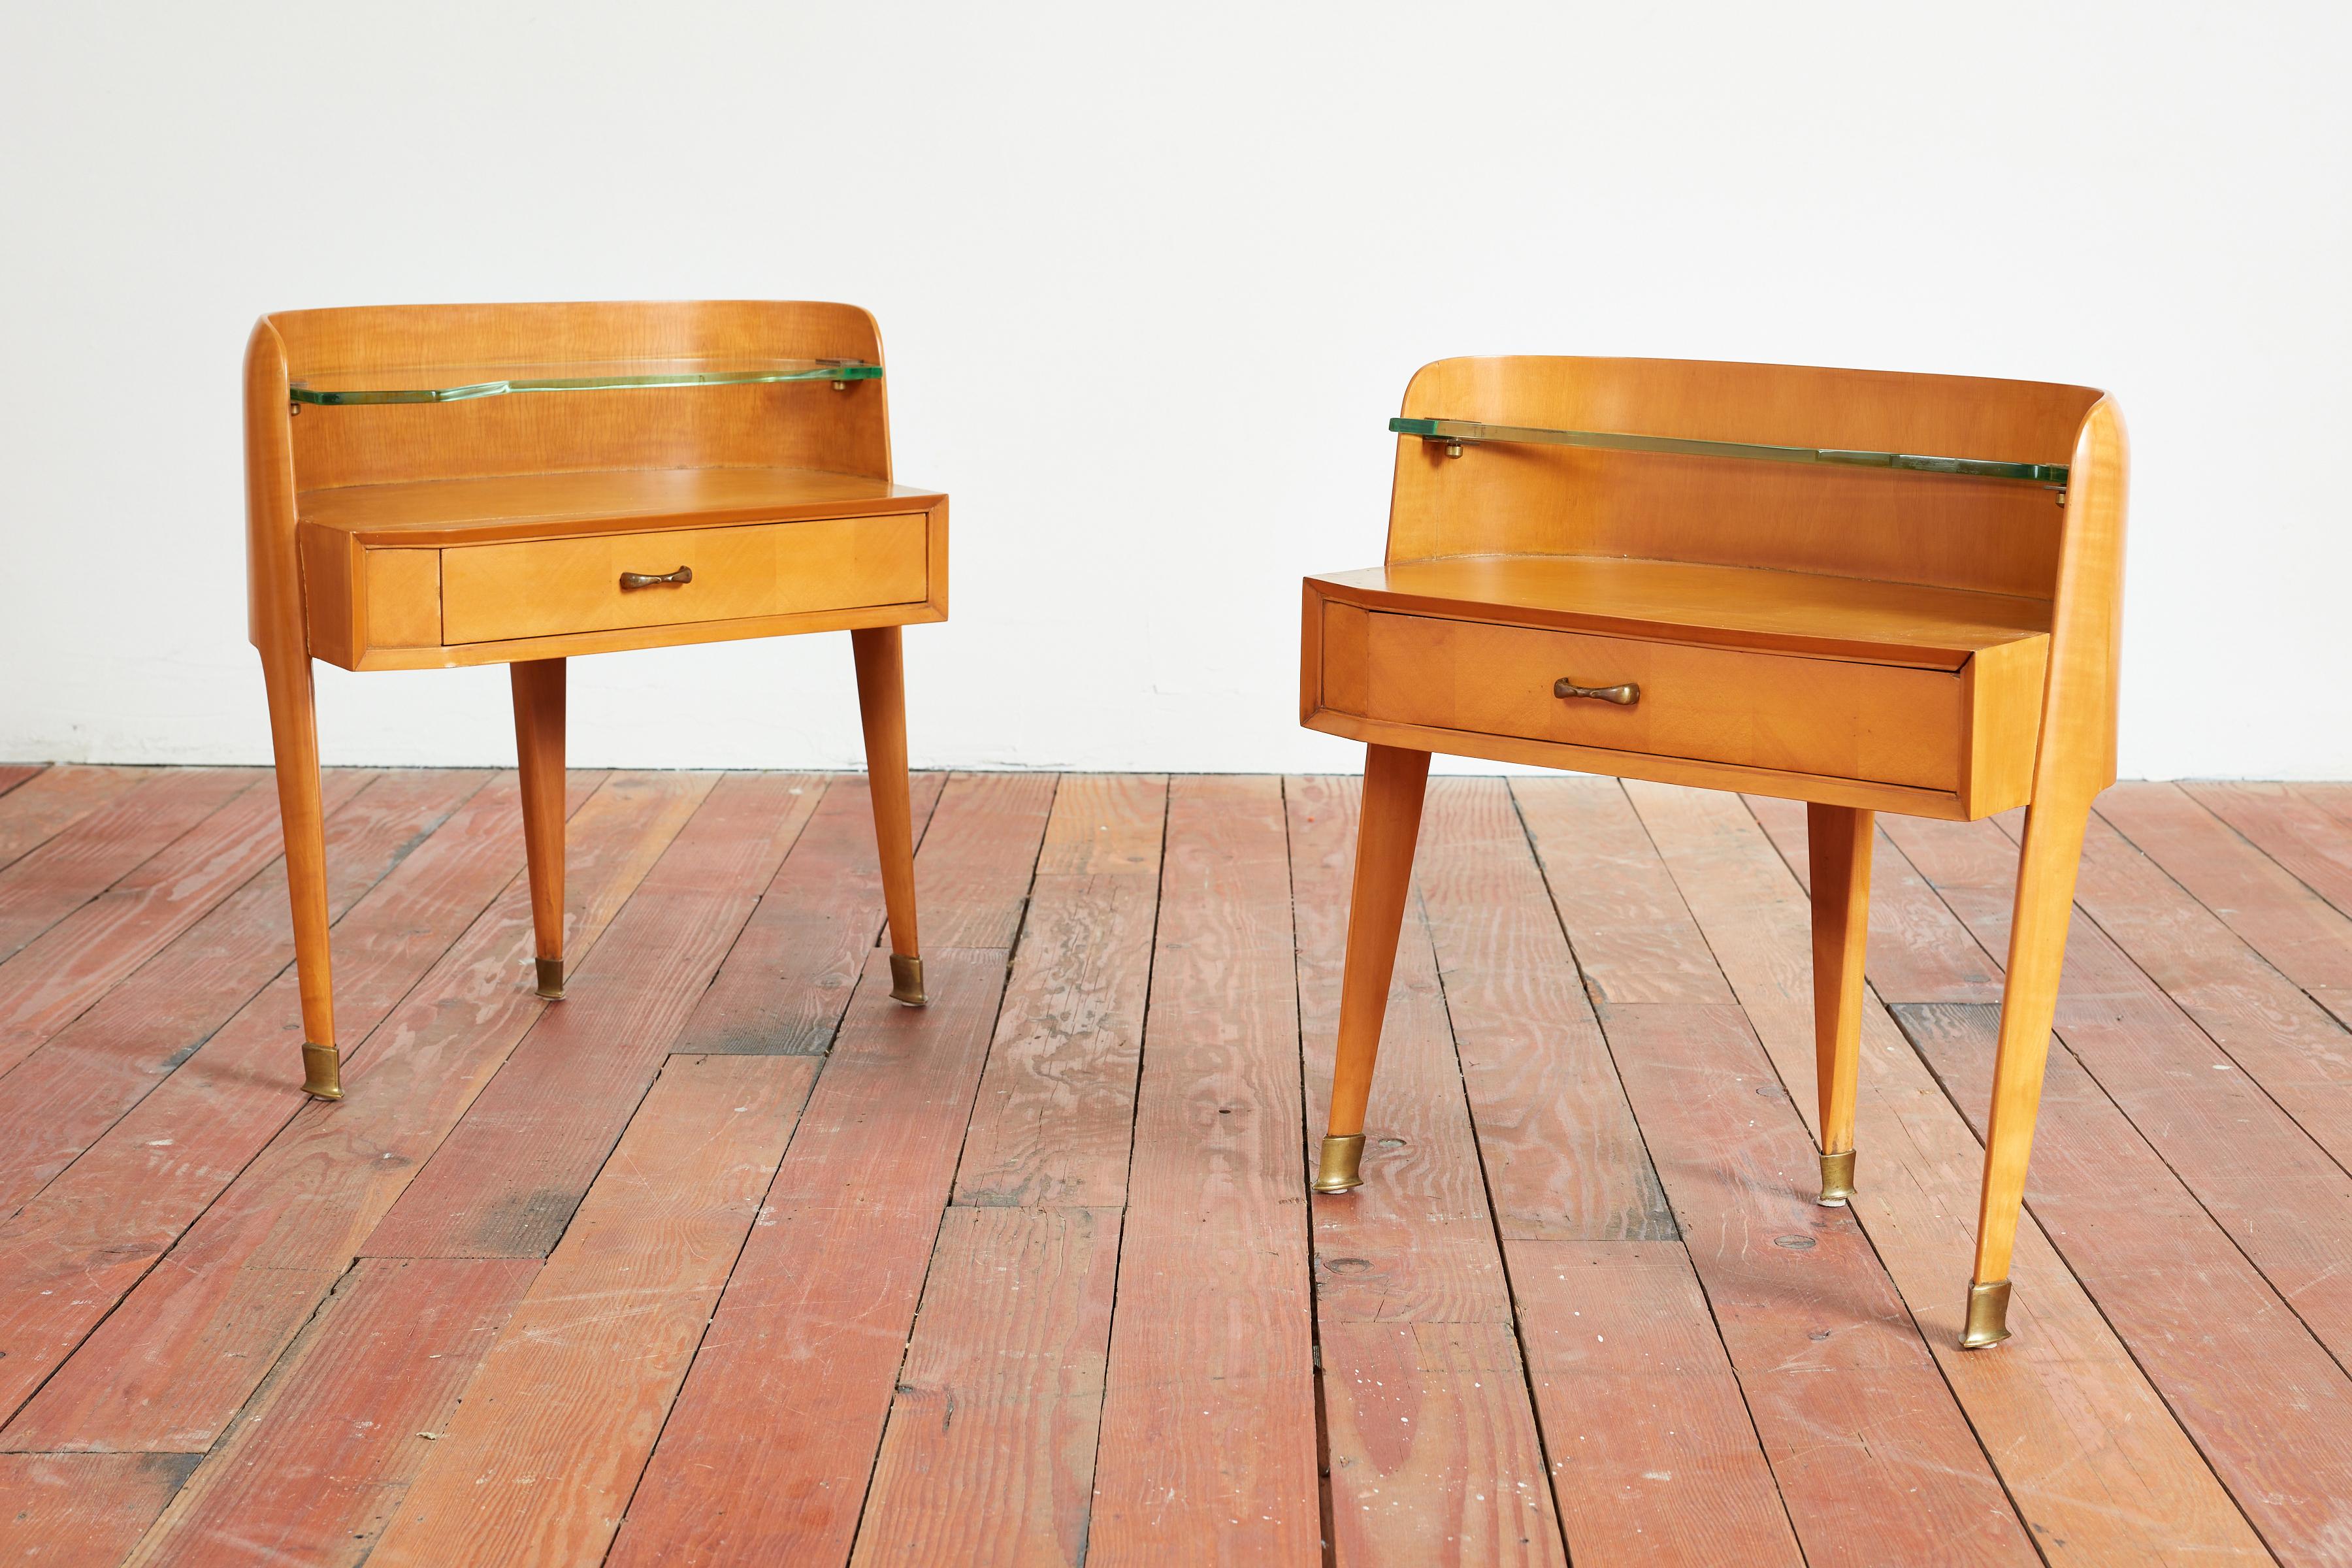 Fantastic pair of Paolo Buffa Nightstands - Italy, 1940s
Curved shape with angular legs with brass hardware and handles 
Original curved glass shelf with single drawer 
Newly refinished.